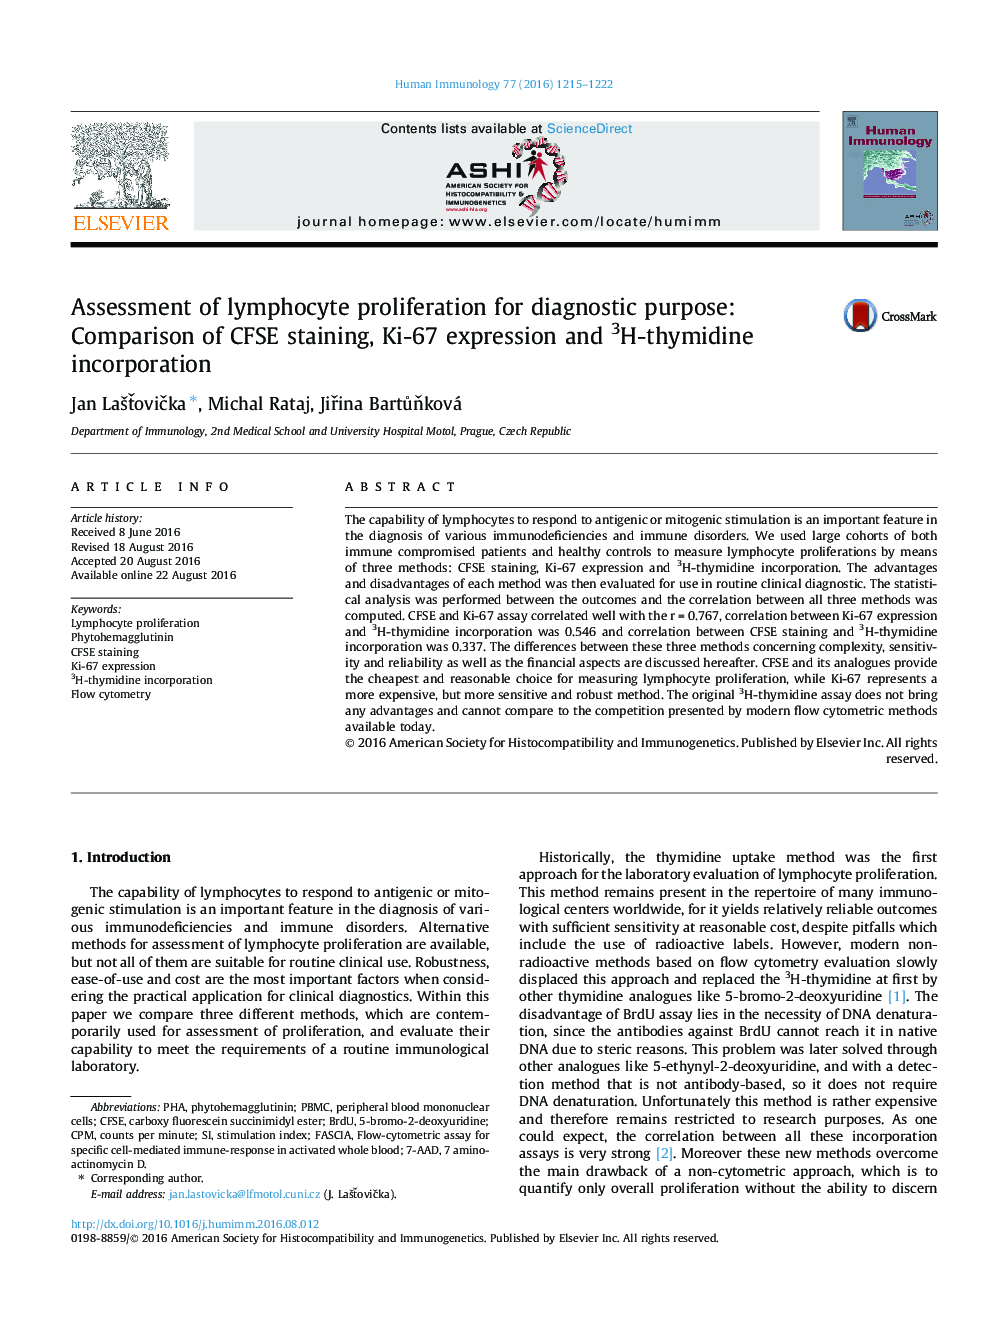 Assessment of lymphocyte proliferation for diagnostic purpose: Comparison of CFSE staining, Ki-67 expression and 3H-thymidine incorporation